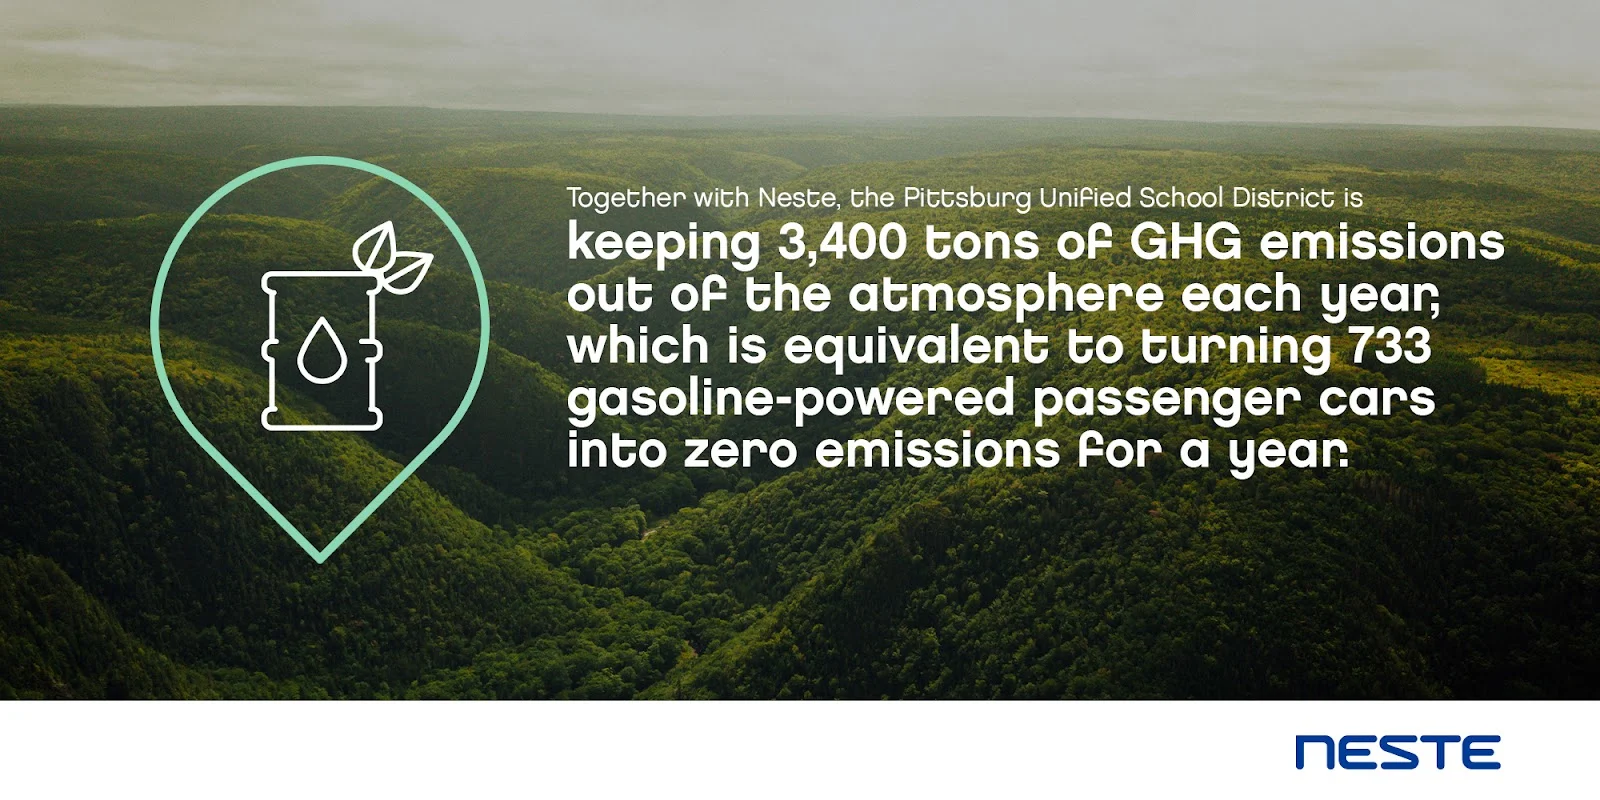 GHG emissions kept out of the atmosphere each year